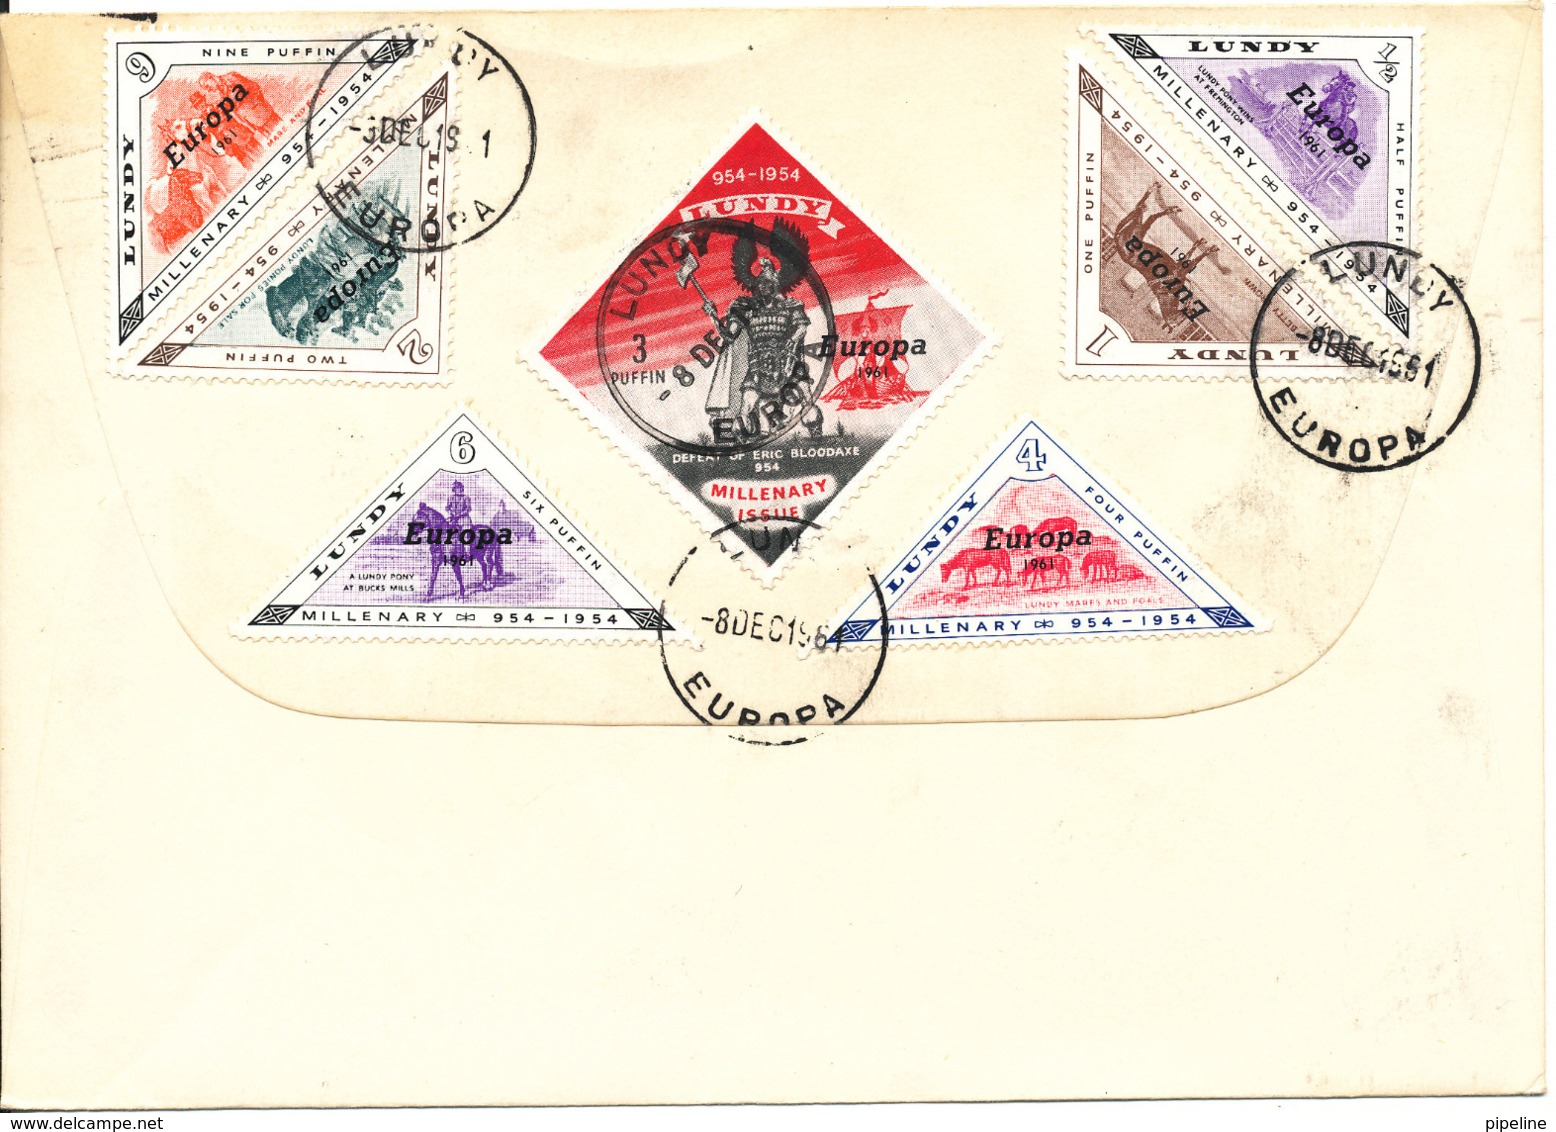 Great Britain CEPT EUROPA With Lundy Complete Set On The Backside 8-12-1961 With Cachet - 1961